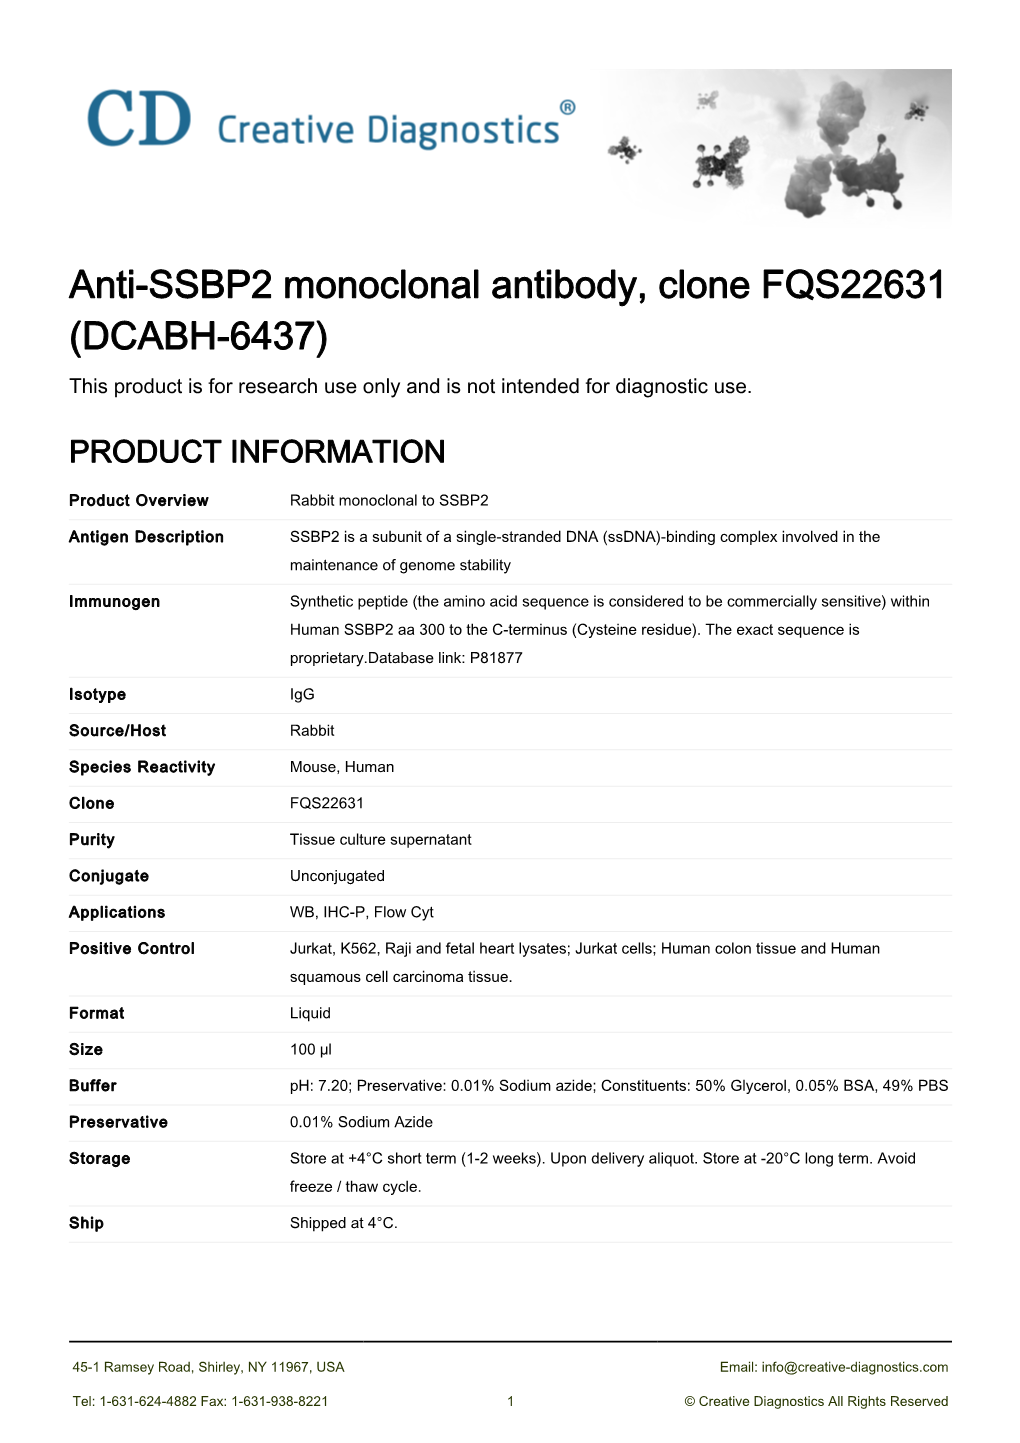 Anti-SSBP2 Monoclonal Antibody, Clone FQS22631 (DCABH-6437) This Product Is for Research Use Only and Is Not Intended for Diagnostic Use